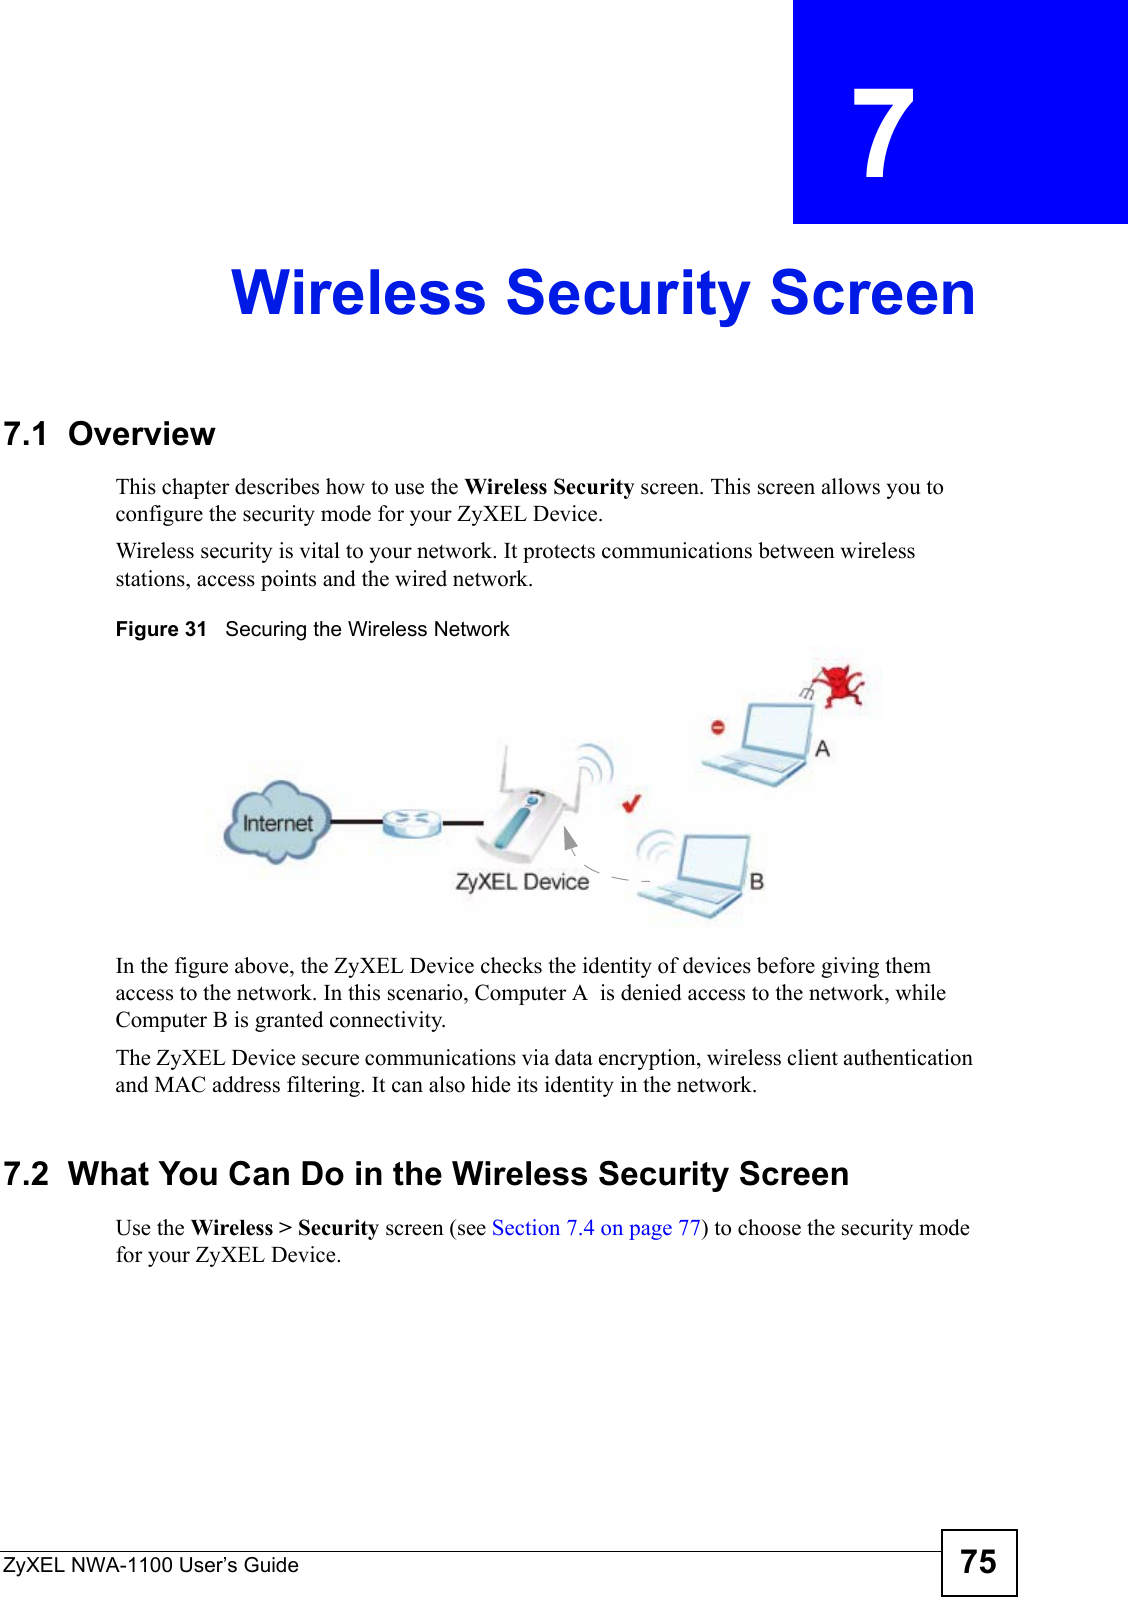 ZyXEL NWA-1100 User’s Guide 75CHAPTER  7 Wireless Security Screen7.1  OverviewThis chapter describes how to use the Wireless Security screen. This screen allows you to configure the security mode for your ZyXEL Device.Wireless security is vital to your network. It protects communications between wireless stations, access points and the wired network. Figure 31   Securing the Wireless NetworkIn the figure above, the ZyXEL Device checks the identity of devices before giving them access to the network. In this scenario, Computer A  is denied access to the network, while Computer B is granted connectivity.The ZyXEL Device secure communications via data encryption, wireless client authentication and MAC address filtering. It can also hide its identity in the network.7.2  What You Can Do in the Wireless Security ScreenUse the Wireless &gt; Security screen (see Section 7.4 on page 77) to choose the security mode for your ZyXEL Device. 